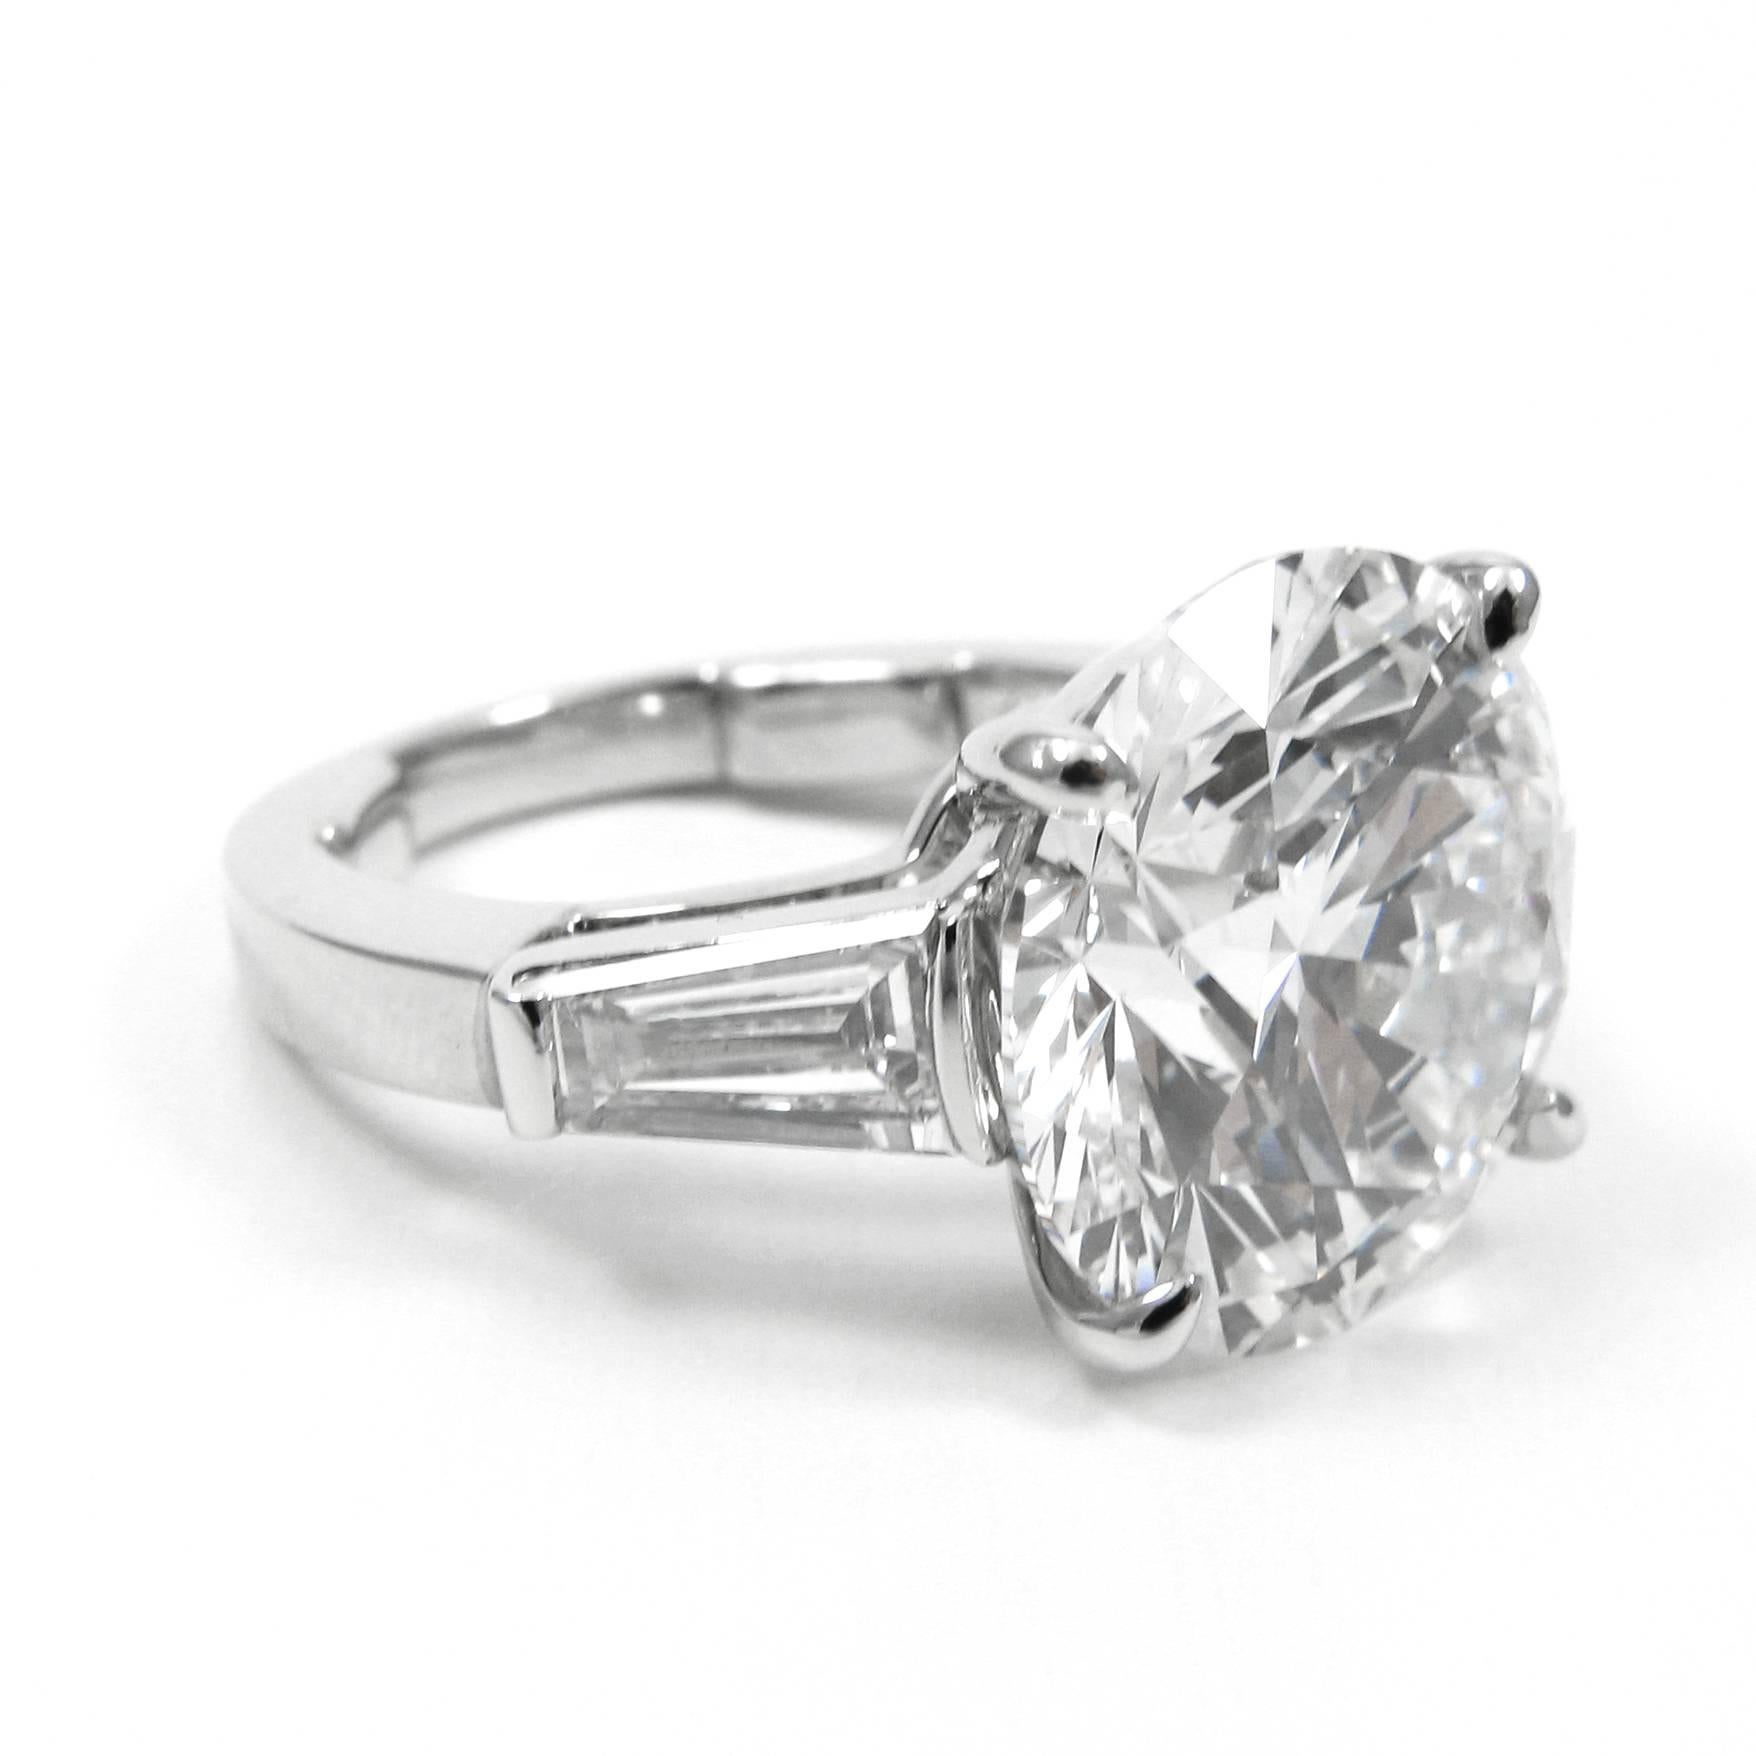 This impressive 8.11 carat round diamond is perfect for anyone looking for statement sparkle! Certified by GIA to be G color, VS1 clarity, and triple excellent cut, this is easily the most brilliant diamond in any room. Set in a classic platinum